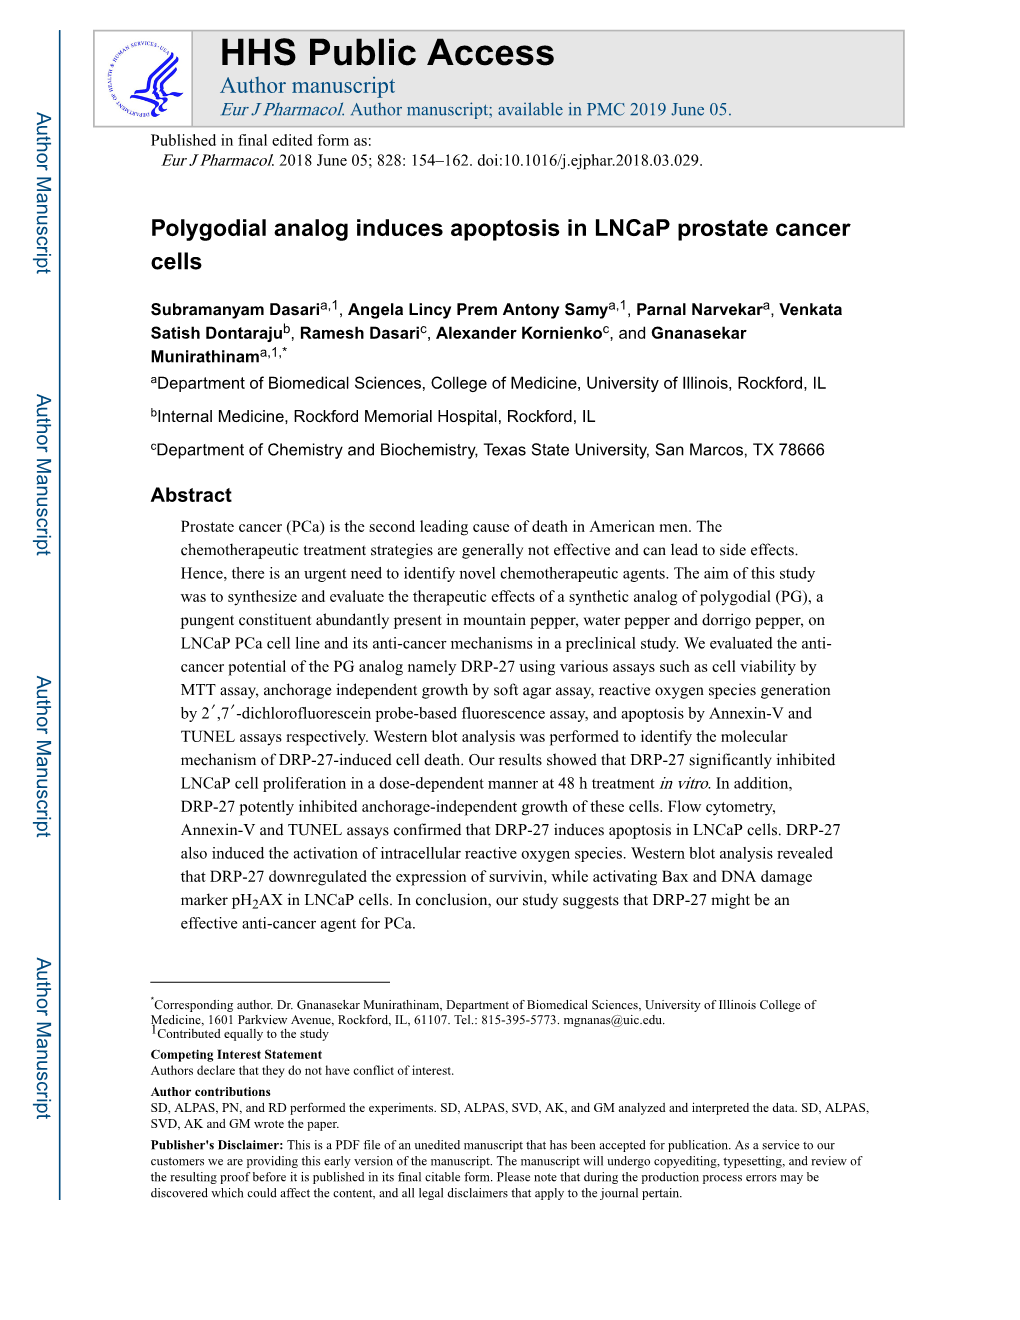 Polygodial Analog Induces Apoptosis in Lncap Prostate Cancer Cells